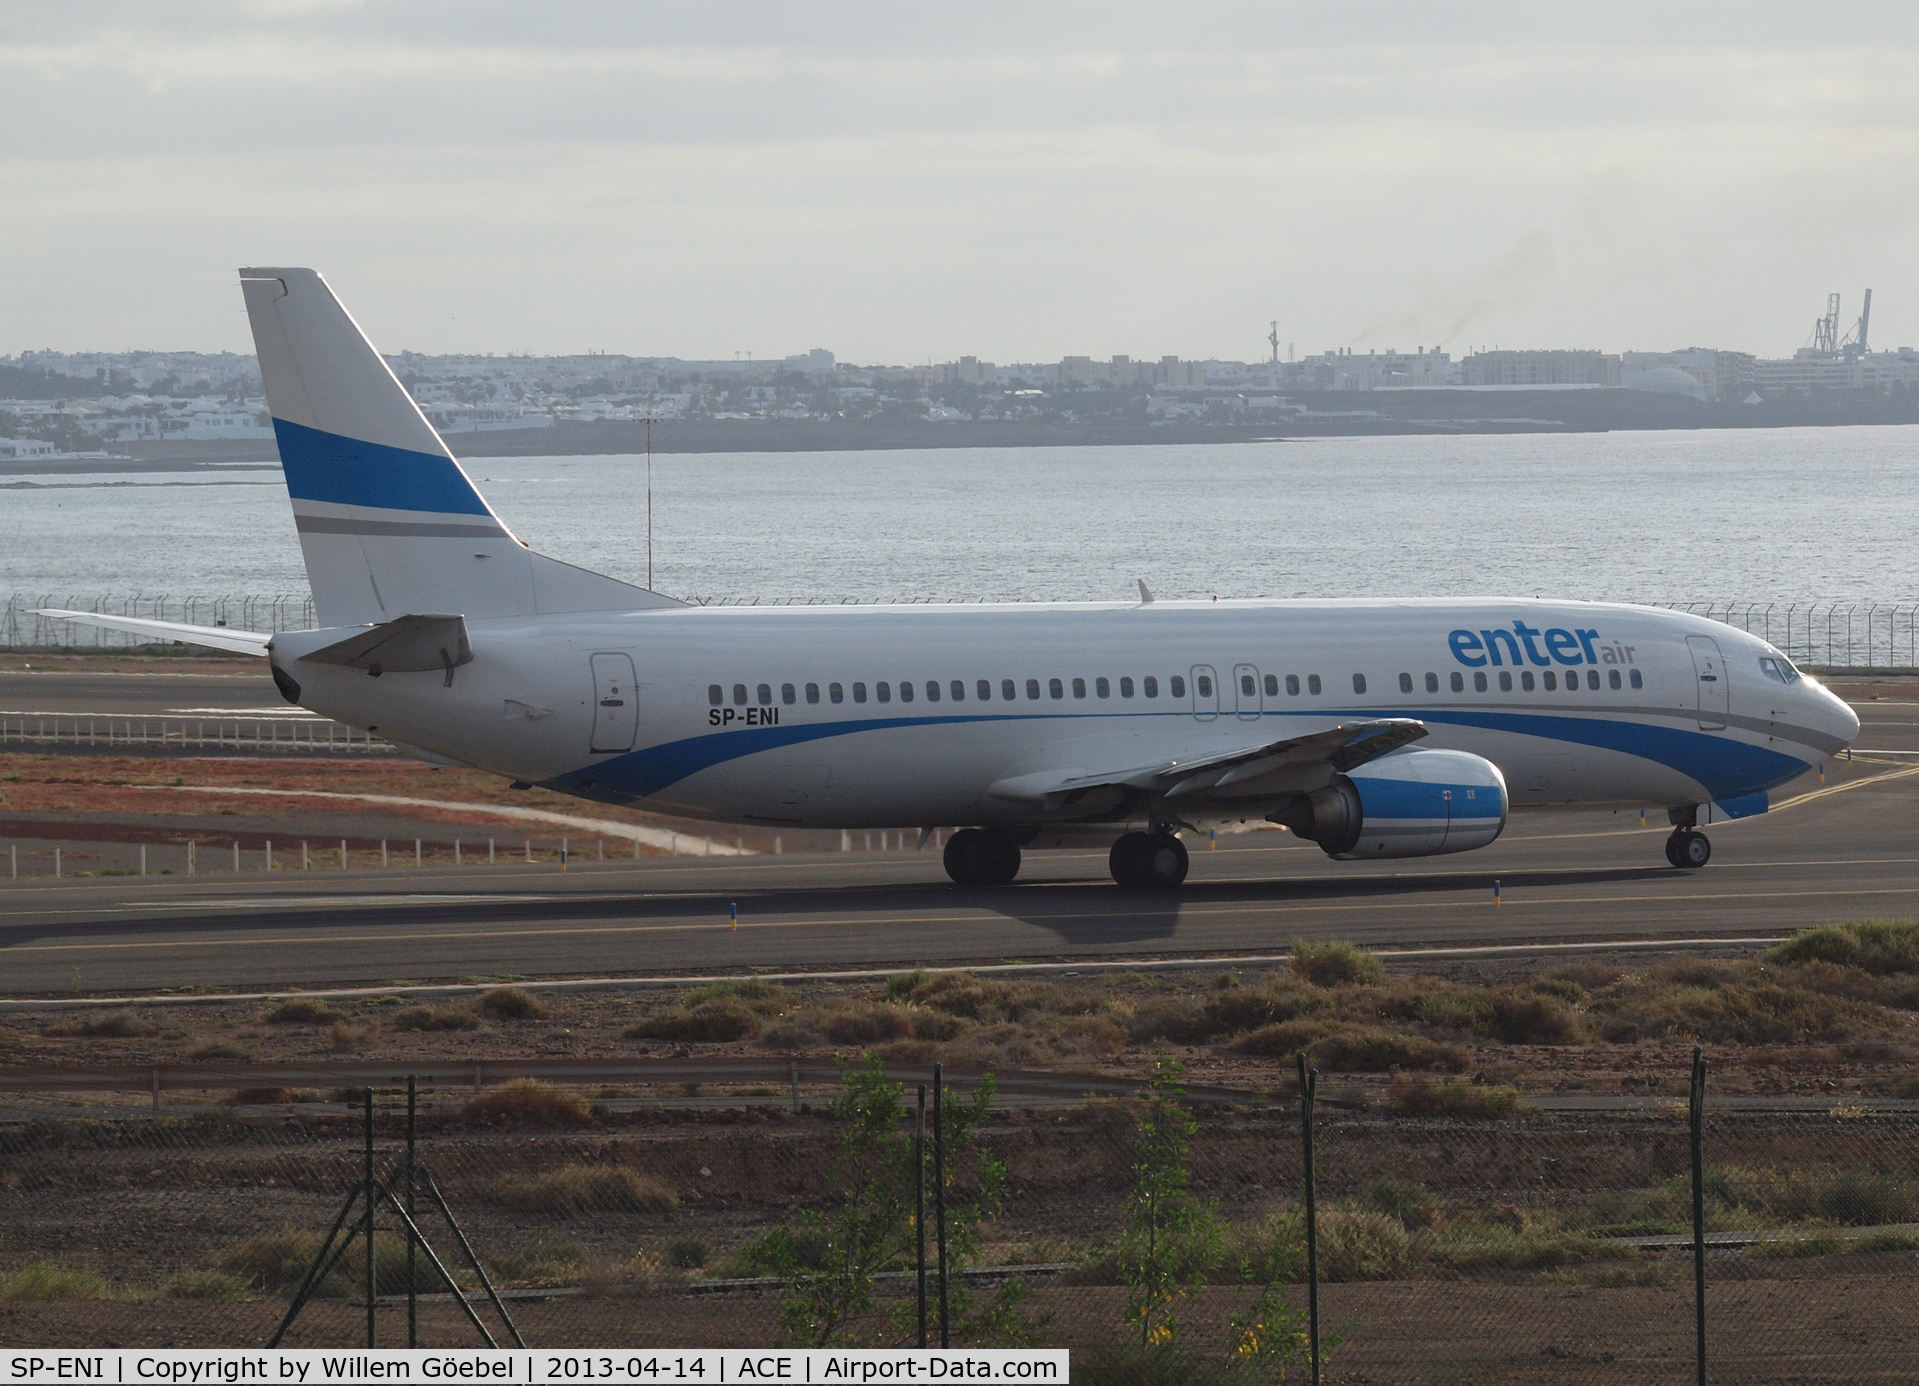 SP-ENI, 1996 Boeing 737-43Q C/N 28489, Taxi to the runway of Lanzarote Airport